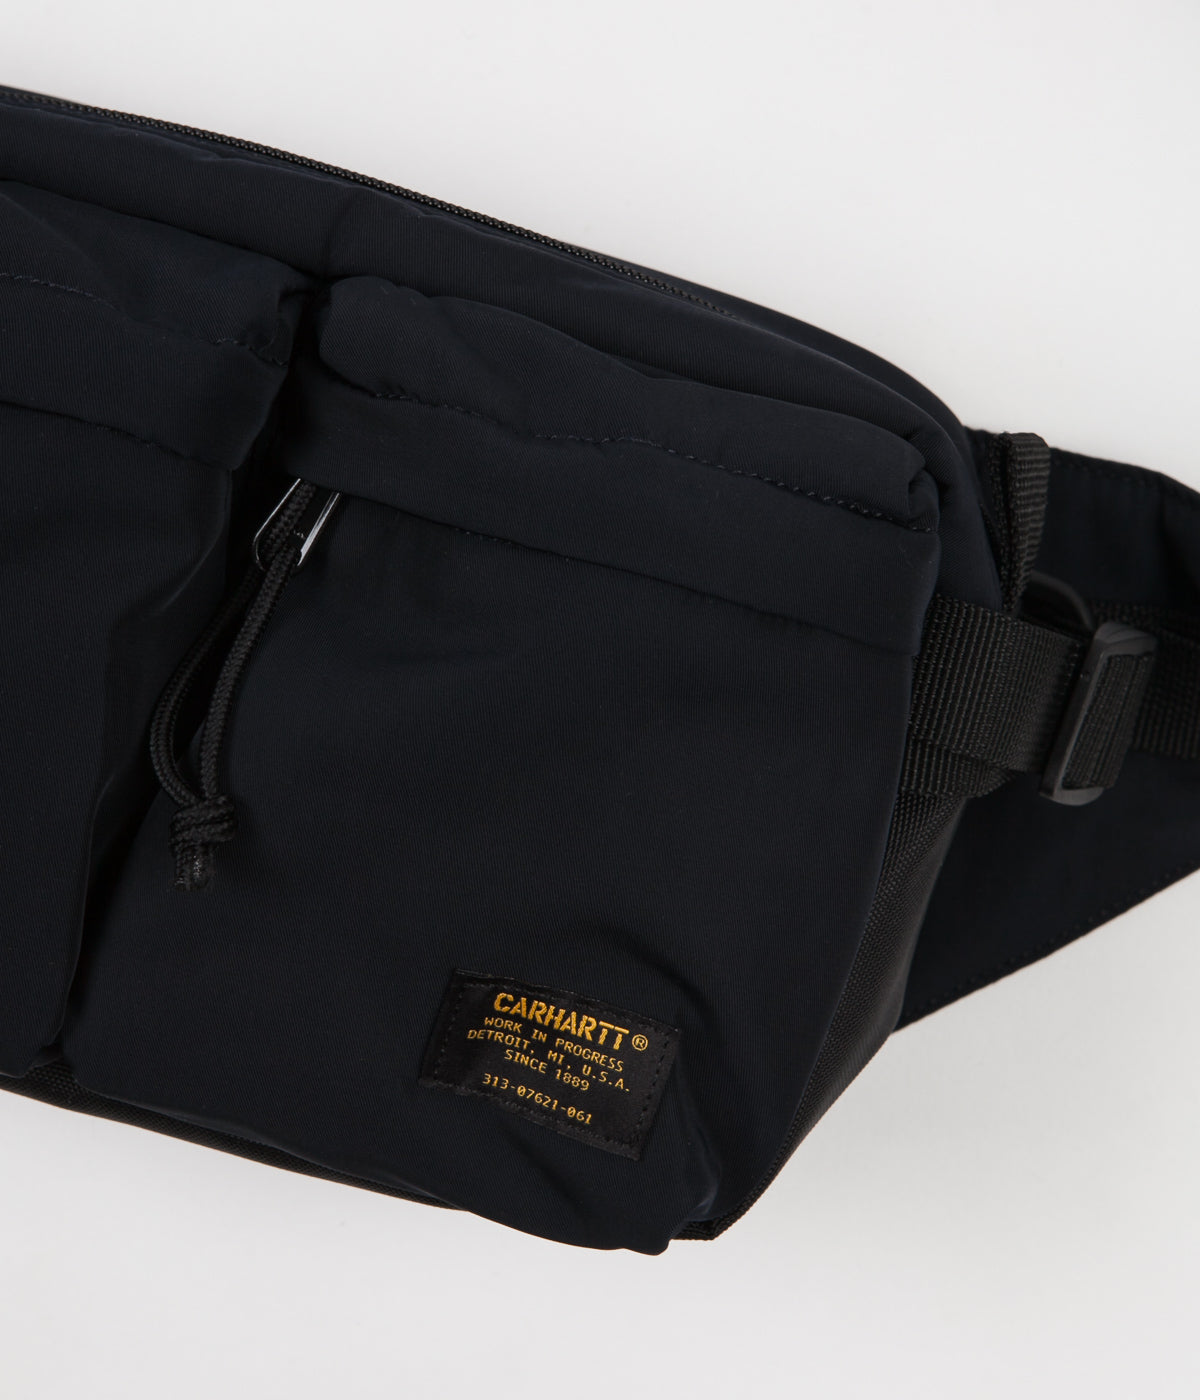 You Seen The Price on X: CARHARTT WIP MILITARY HIP BAG PEPPER / BLACK WAS  £64.99 NOW £38.99 Click or copy here >  to buy  this #Carhartt WIP #Military Hip Bag